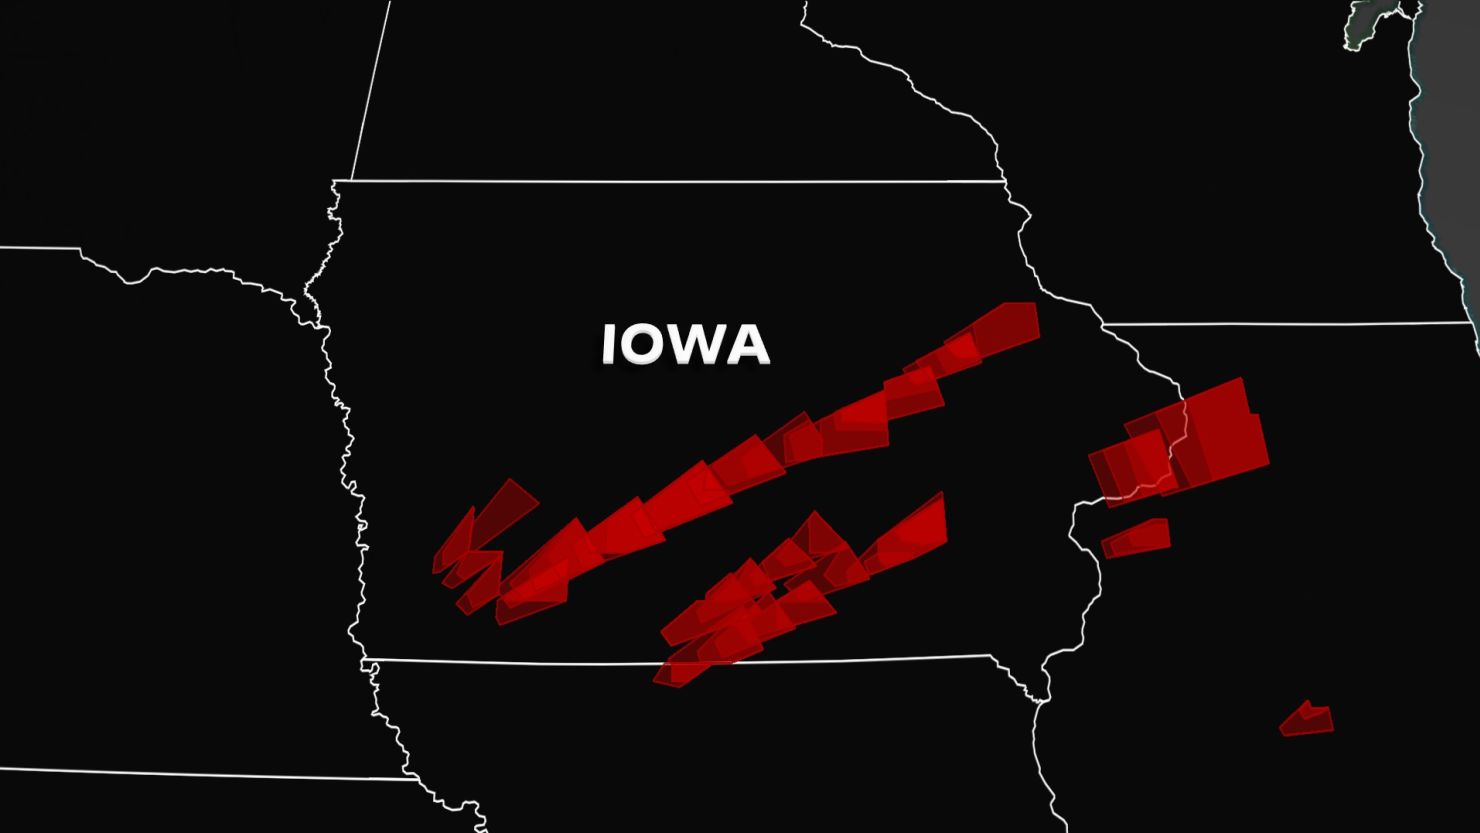 This image shows tornado warnings (in red) issued across Iowa and the surrounding states on Saturday, March 5, 2022.